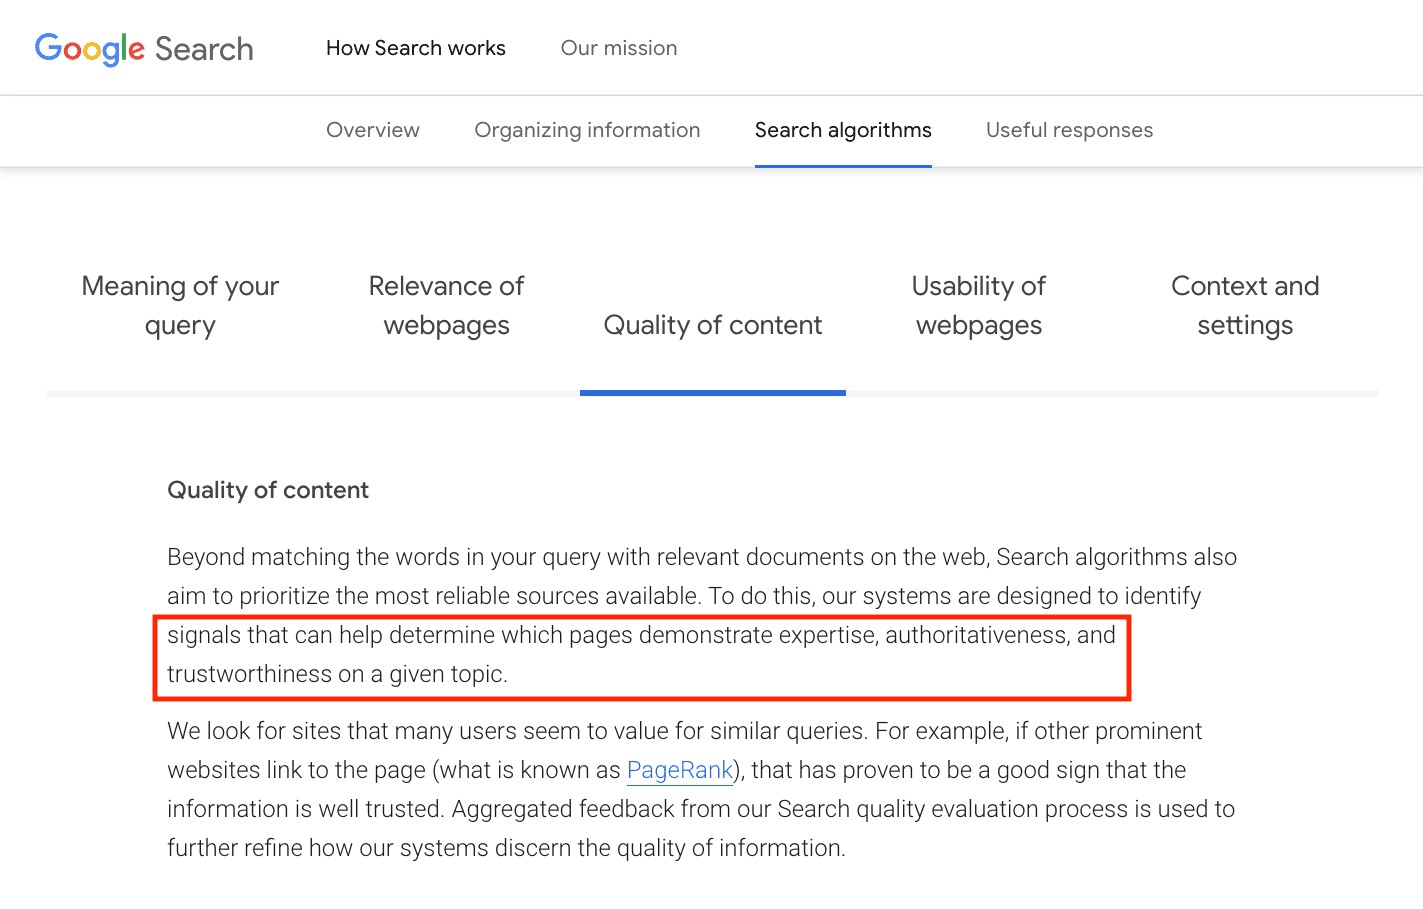 The details of Google ranking factors for content on the search engines results page